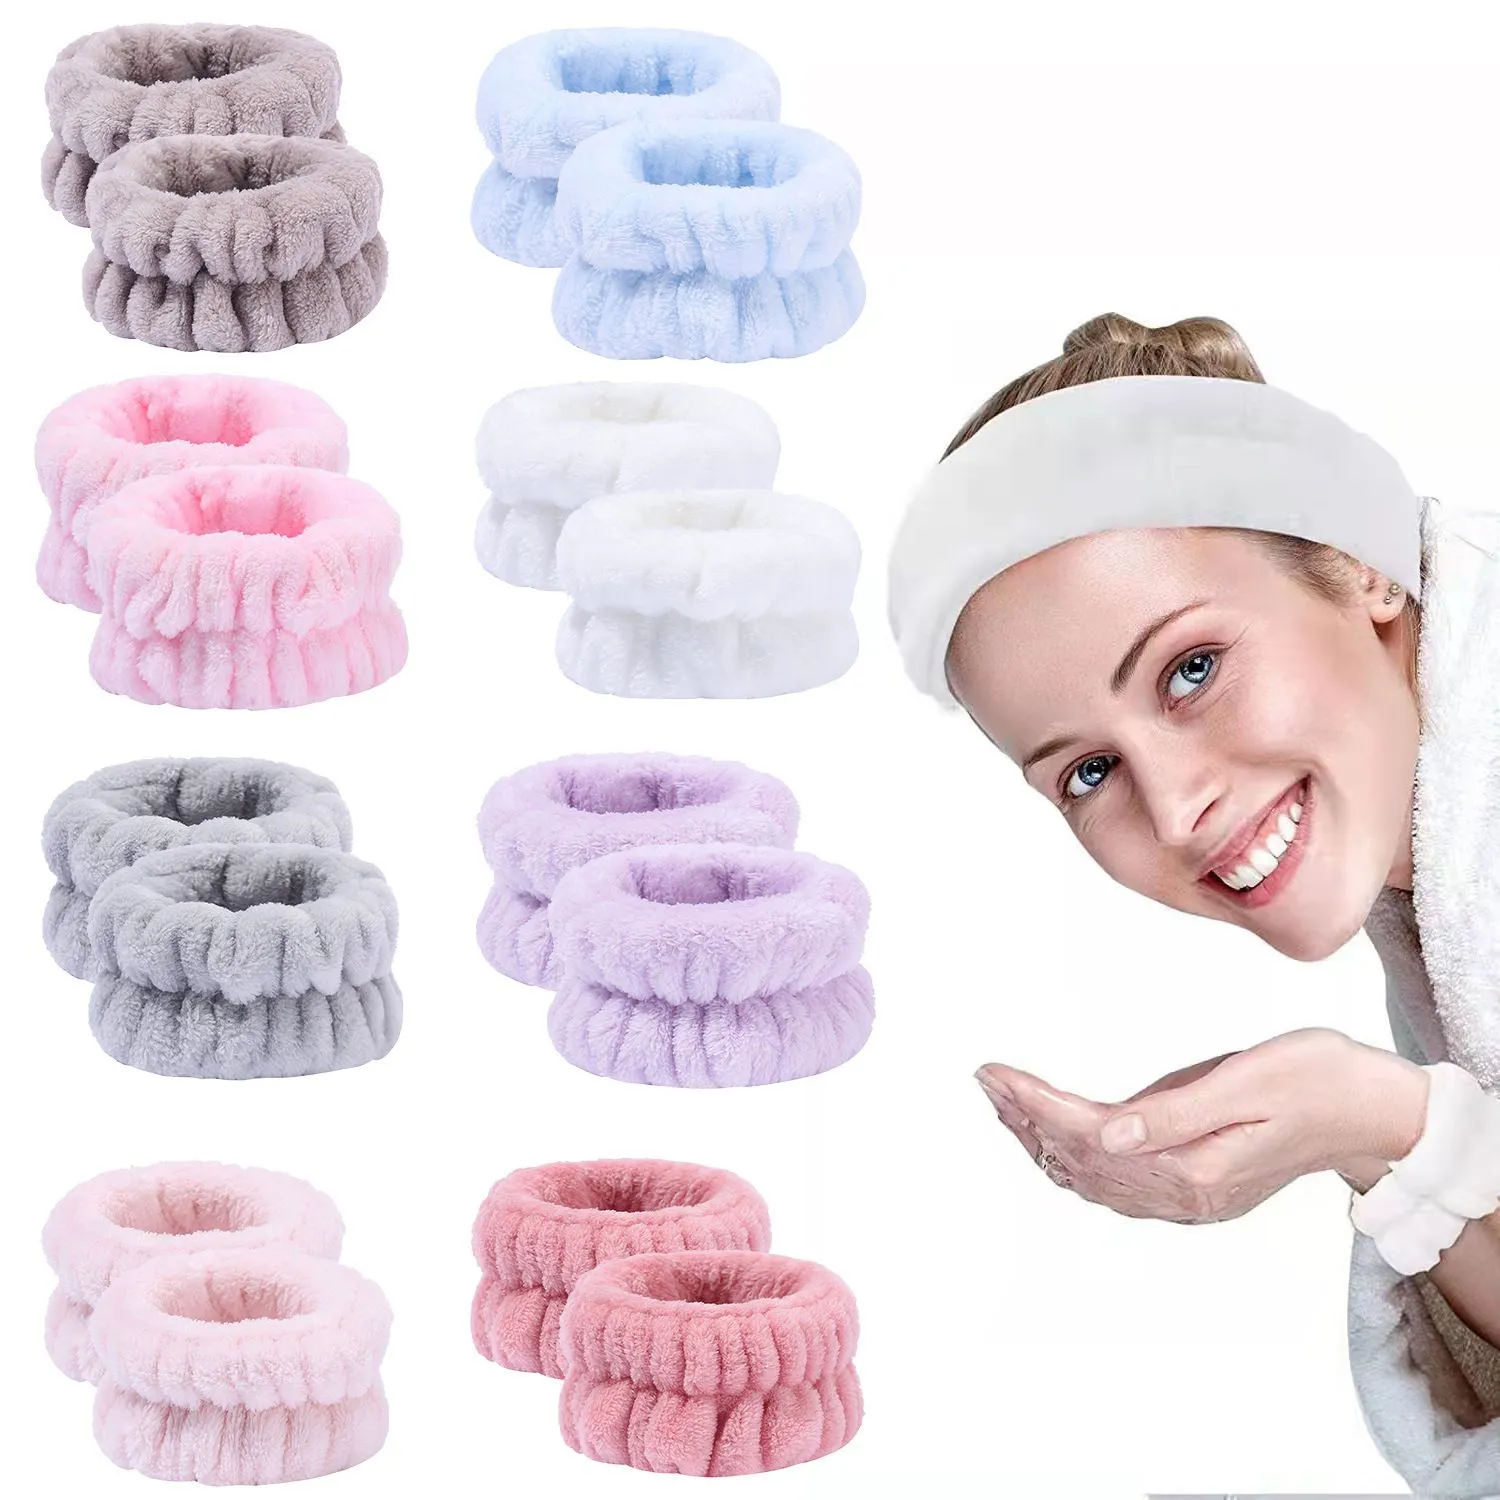 Face Wash Hand Wrist Strap Reusable Sweat Band Microfiber Towel Bands Flexible Absorbent Wrists Straps For Comfortable